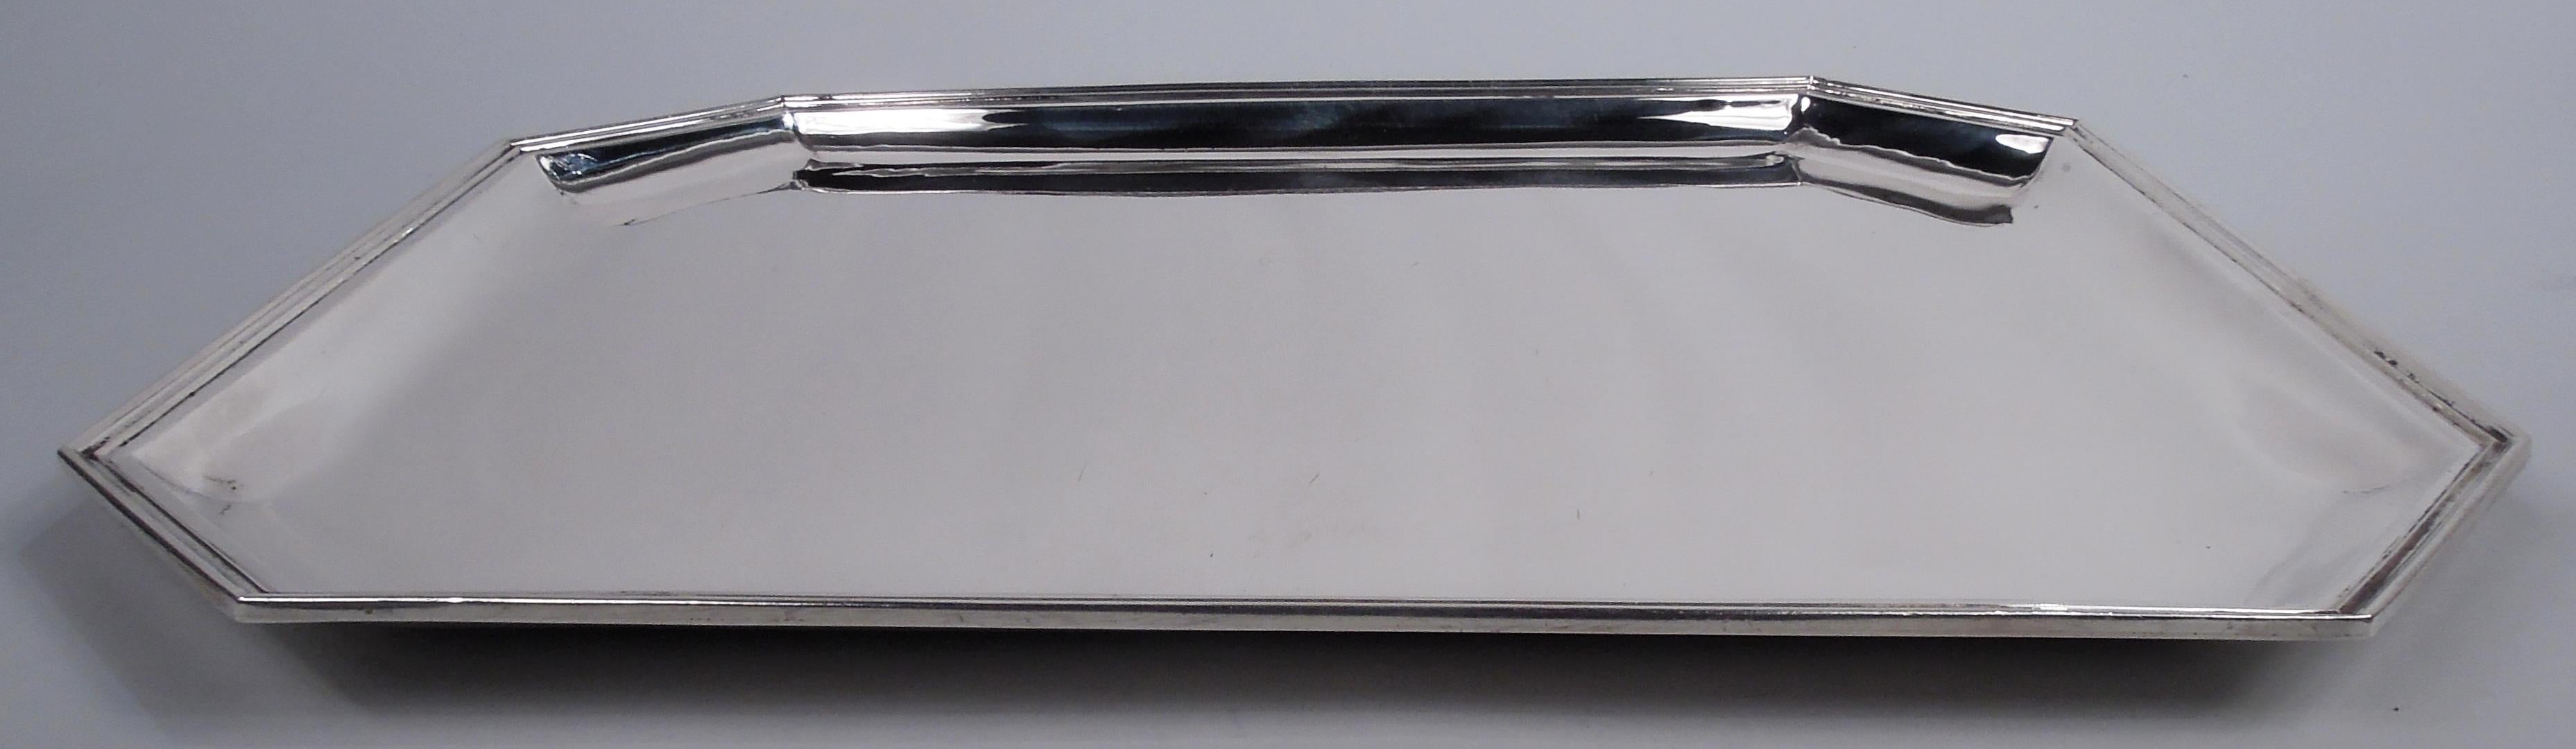 American Art Deco sterling silver tray, ca 1925. Retailed by Cartier in New York. Rectangular with chamfered corners, tapering sides, and molded rim. Fully marked including retailer’s stamp, no. 47/4 and phrase “Hand Made”.  Weight: 43.8 troy ounces.